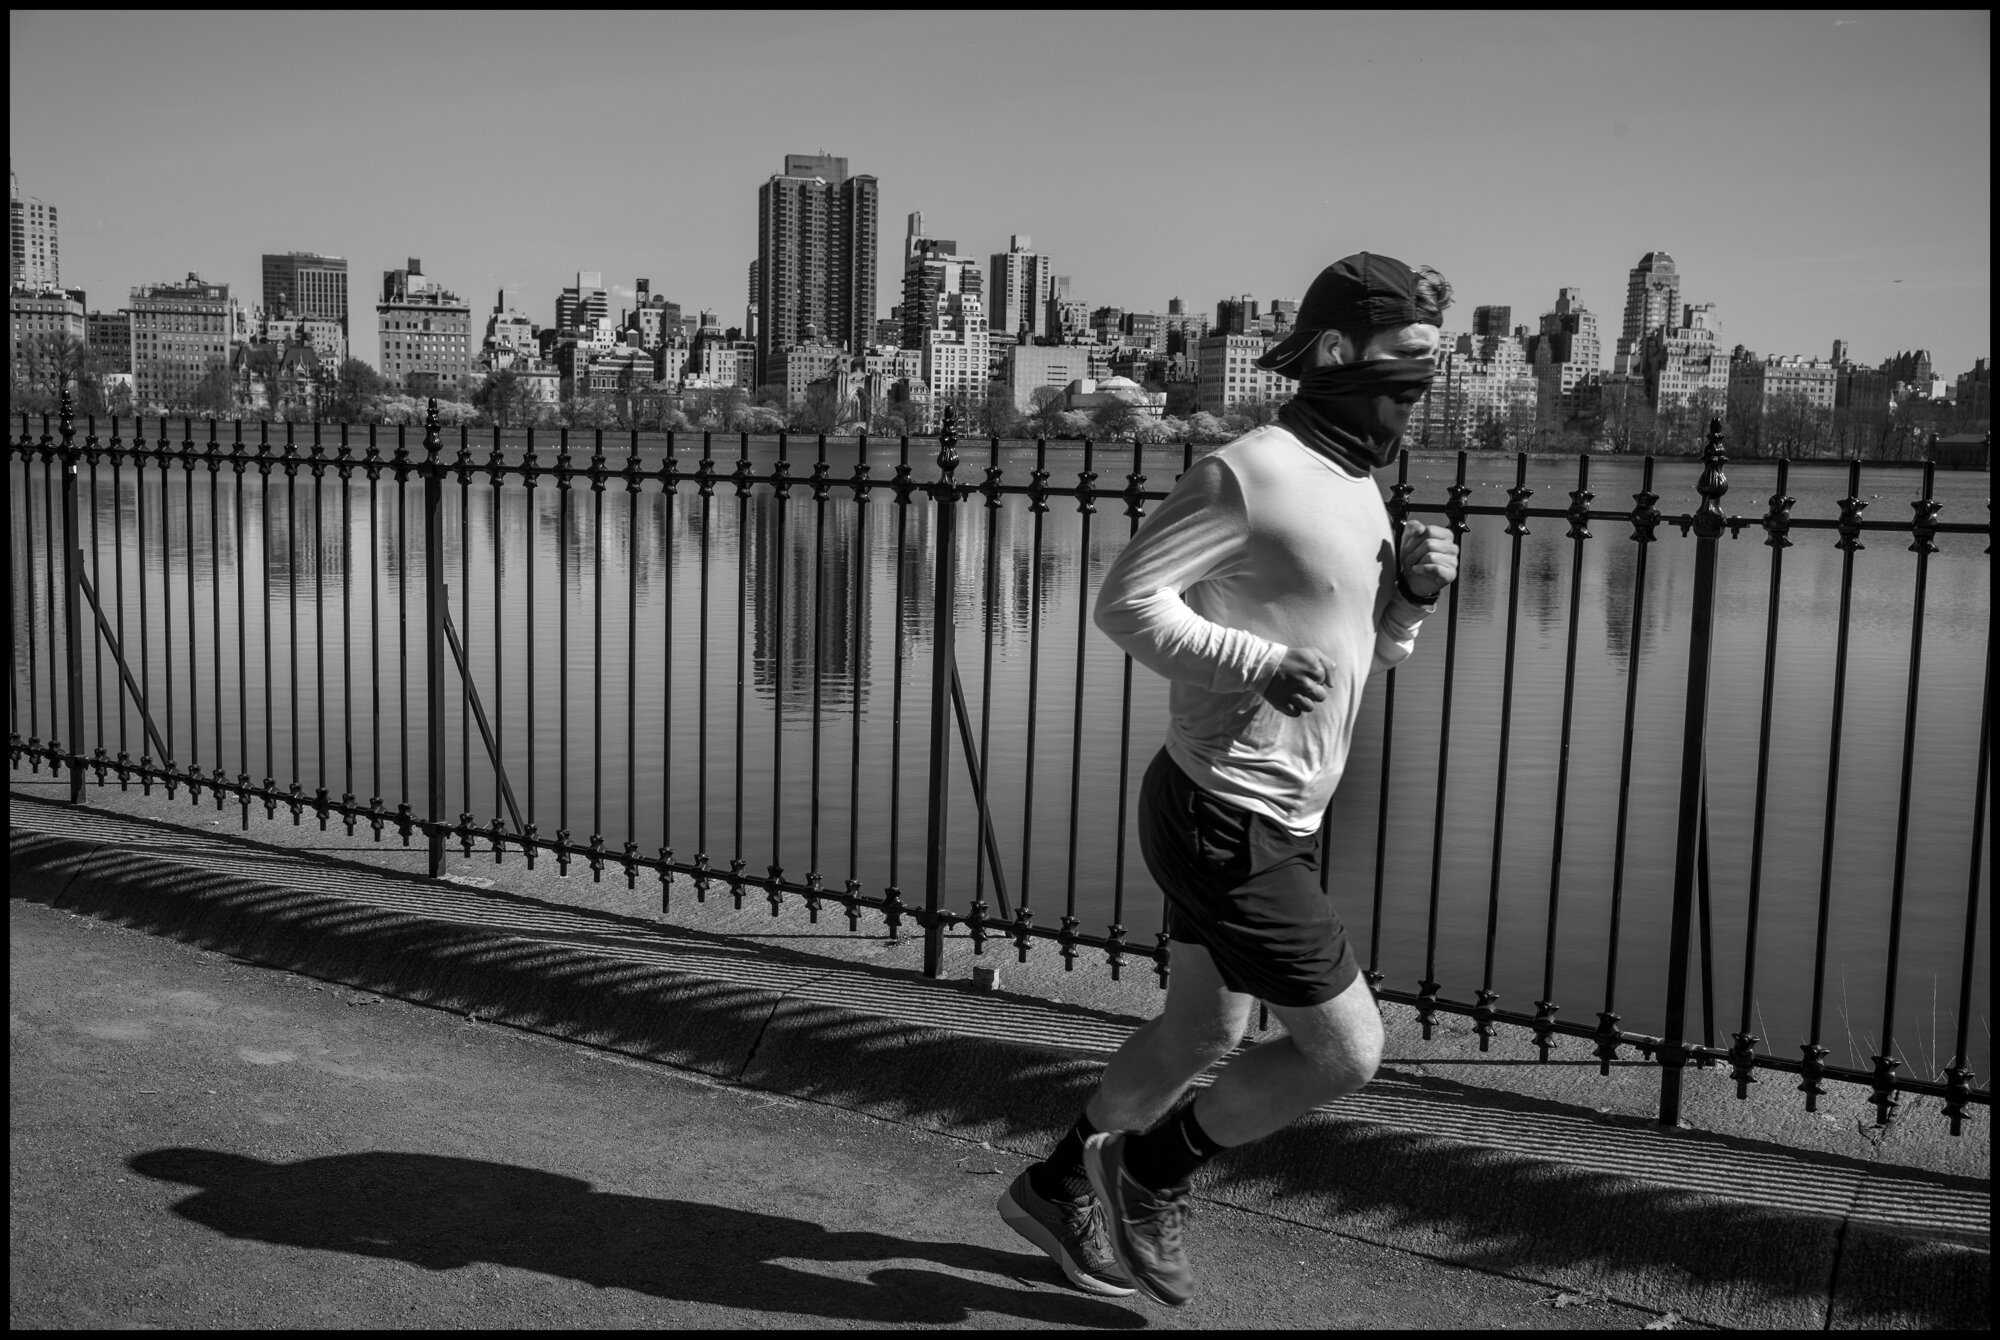  A young man runs by the Resevoir in Central Park wearing a cloth mask, which has now been ordered by the Governor of New York for all person when they are outside. Monday was one of the most beautiful early spring days yet in New York, and after now